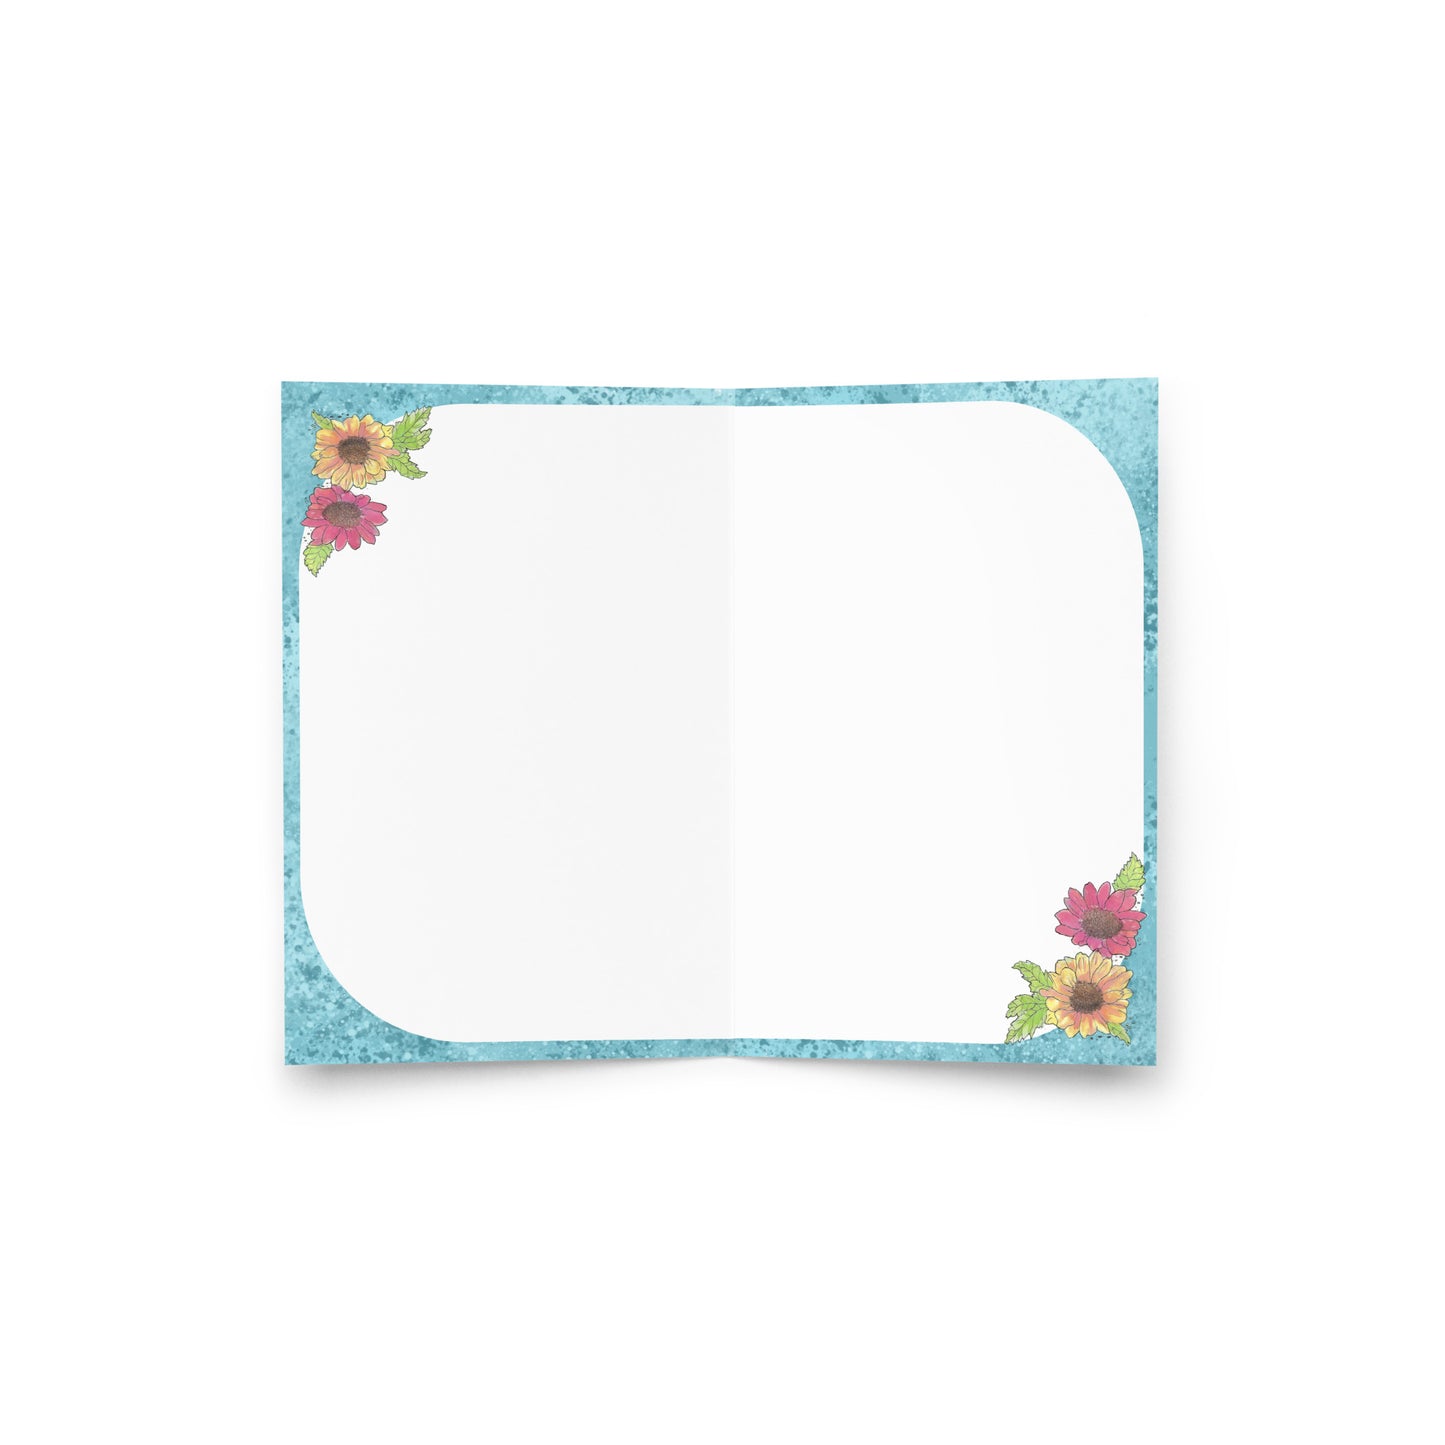 4 by 6 inch watercolor Gerber daisies set of 10 greeting cards and envelopes. Has watercolor daisies on the front. The inside has a blue watercolor border with daisy accents and room for a message. Image shows inside of card.